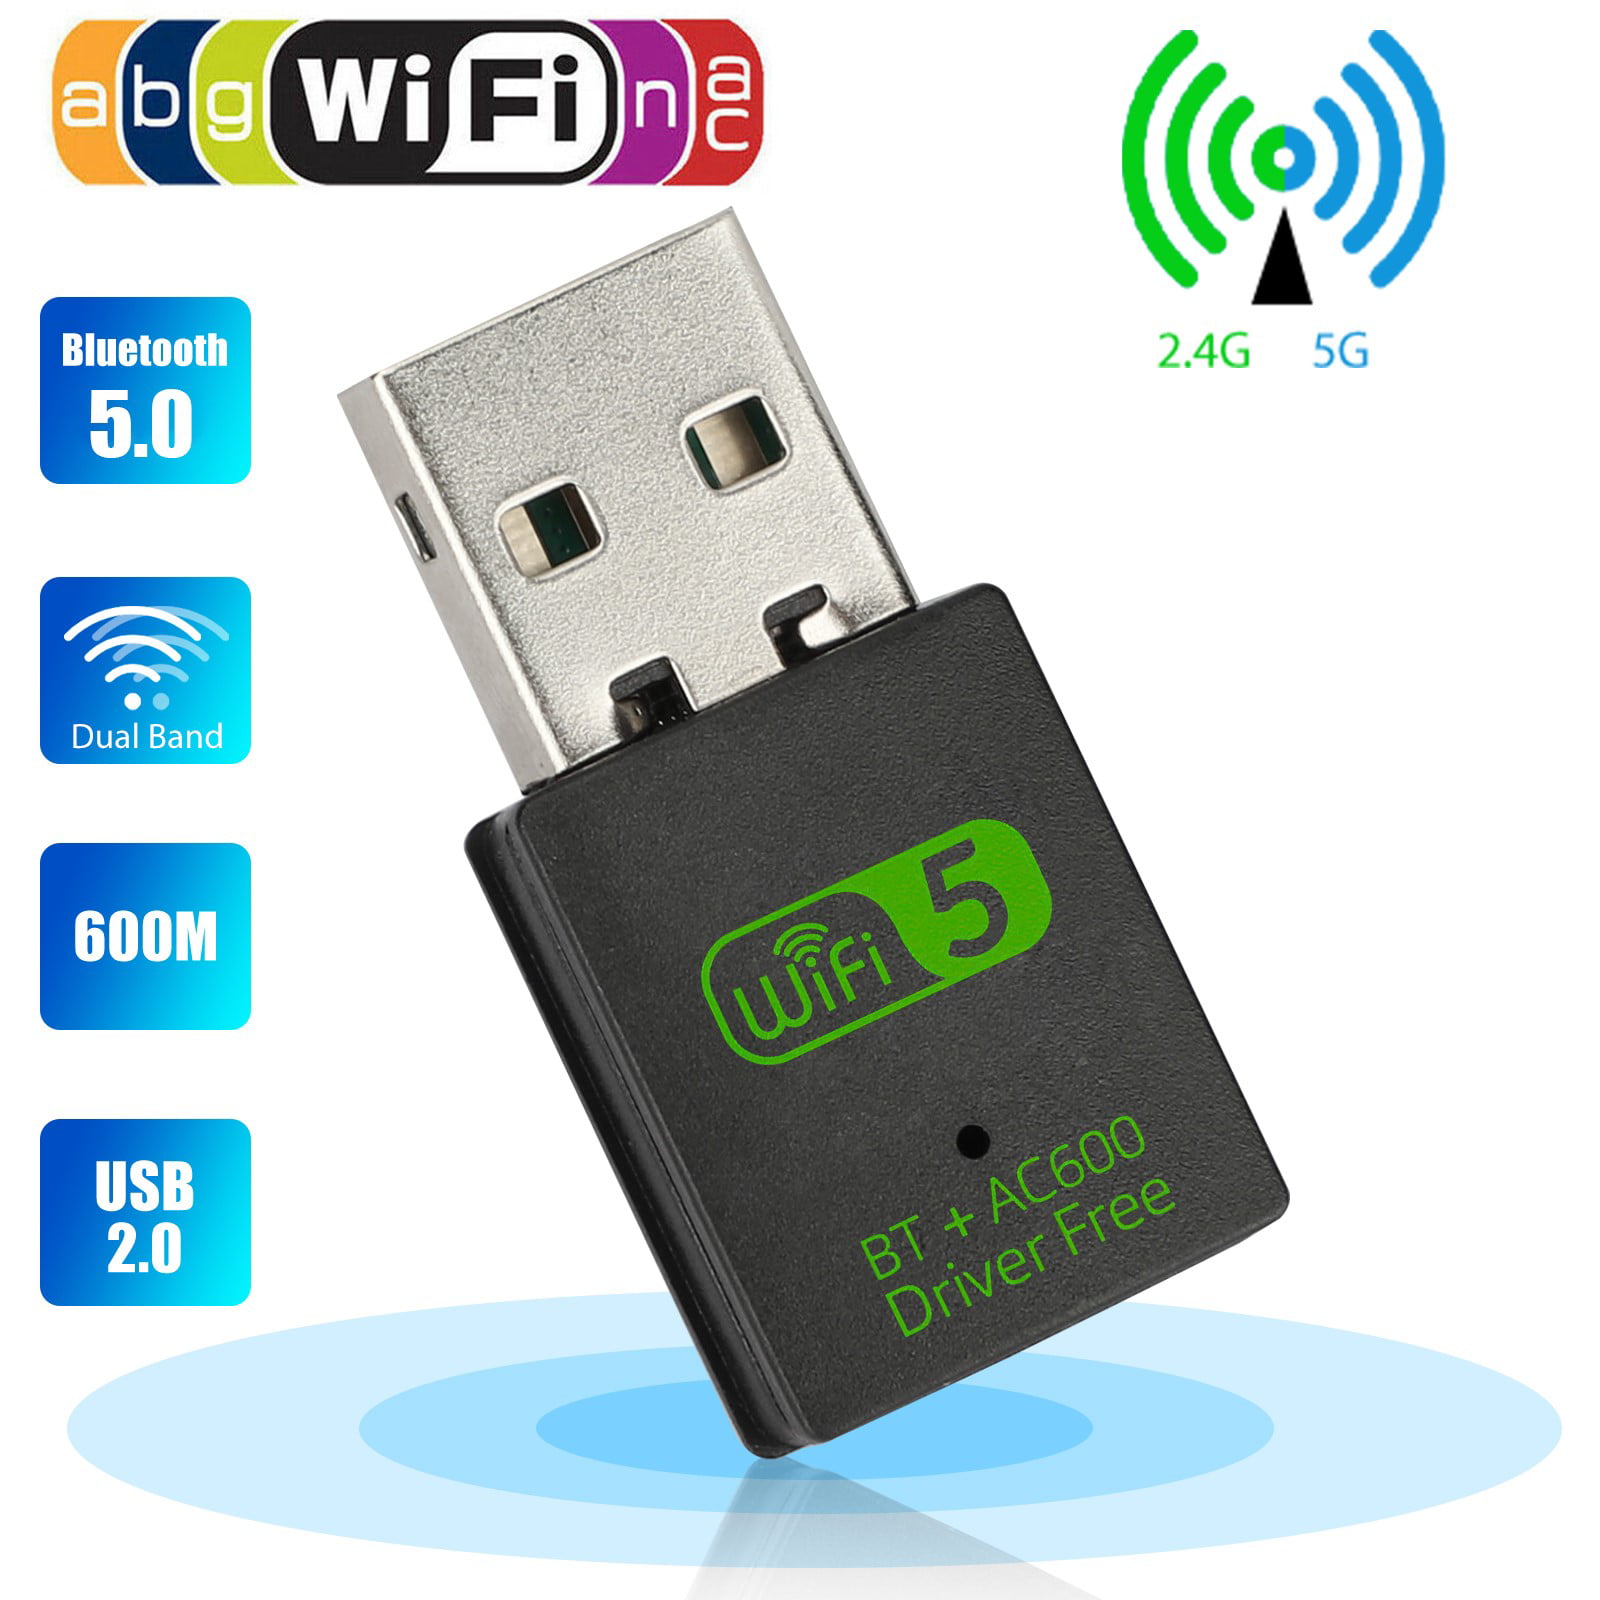 USB WiFi Adapter 300Mbps Plug and Play WiFi Dongle for PC Desktop Laptop,Wireless Network Adapter Support Windows 10/8/8.1/7/XP,Nano Size No CD Needed 